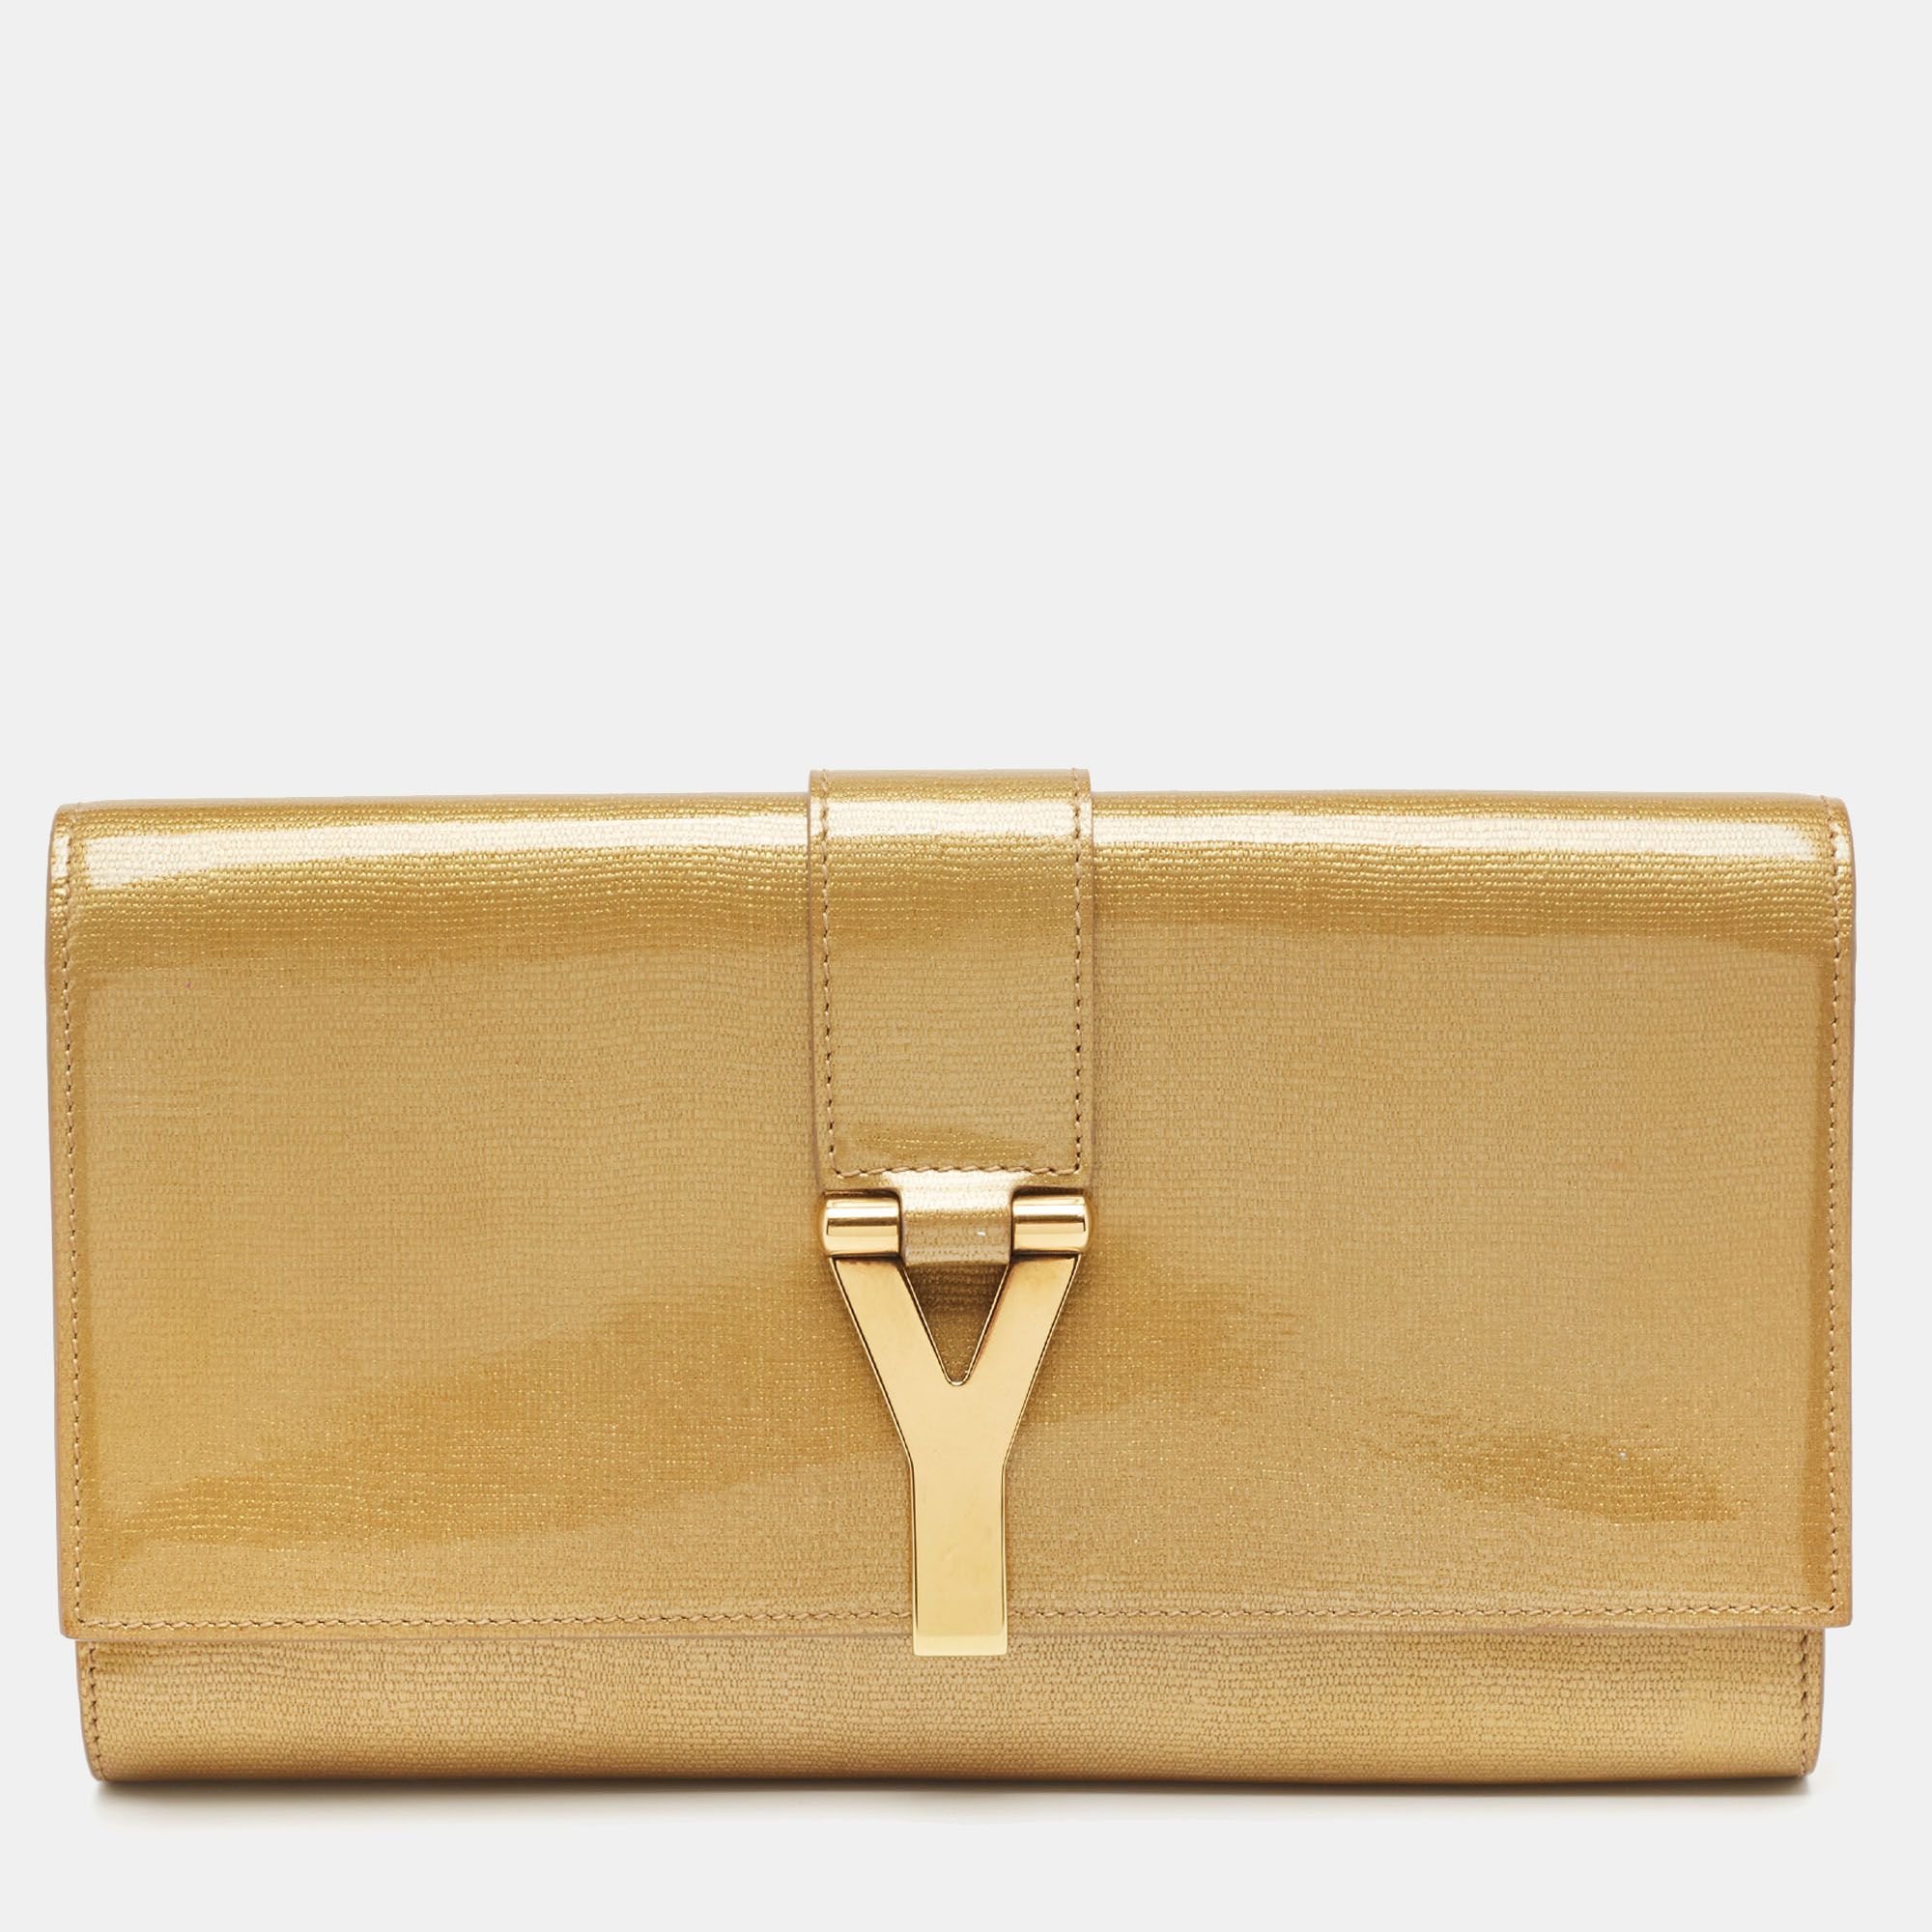 Pre-owned Saint Laurent Gold Leather Large Chyc Clutch